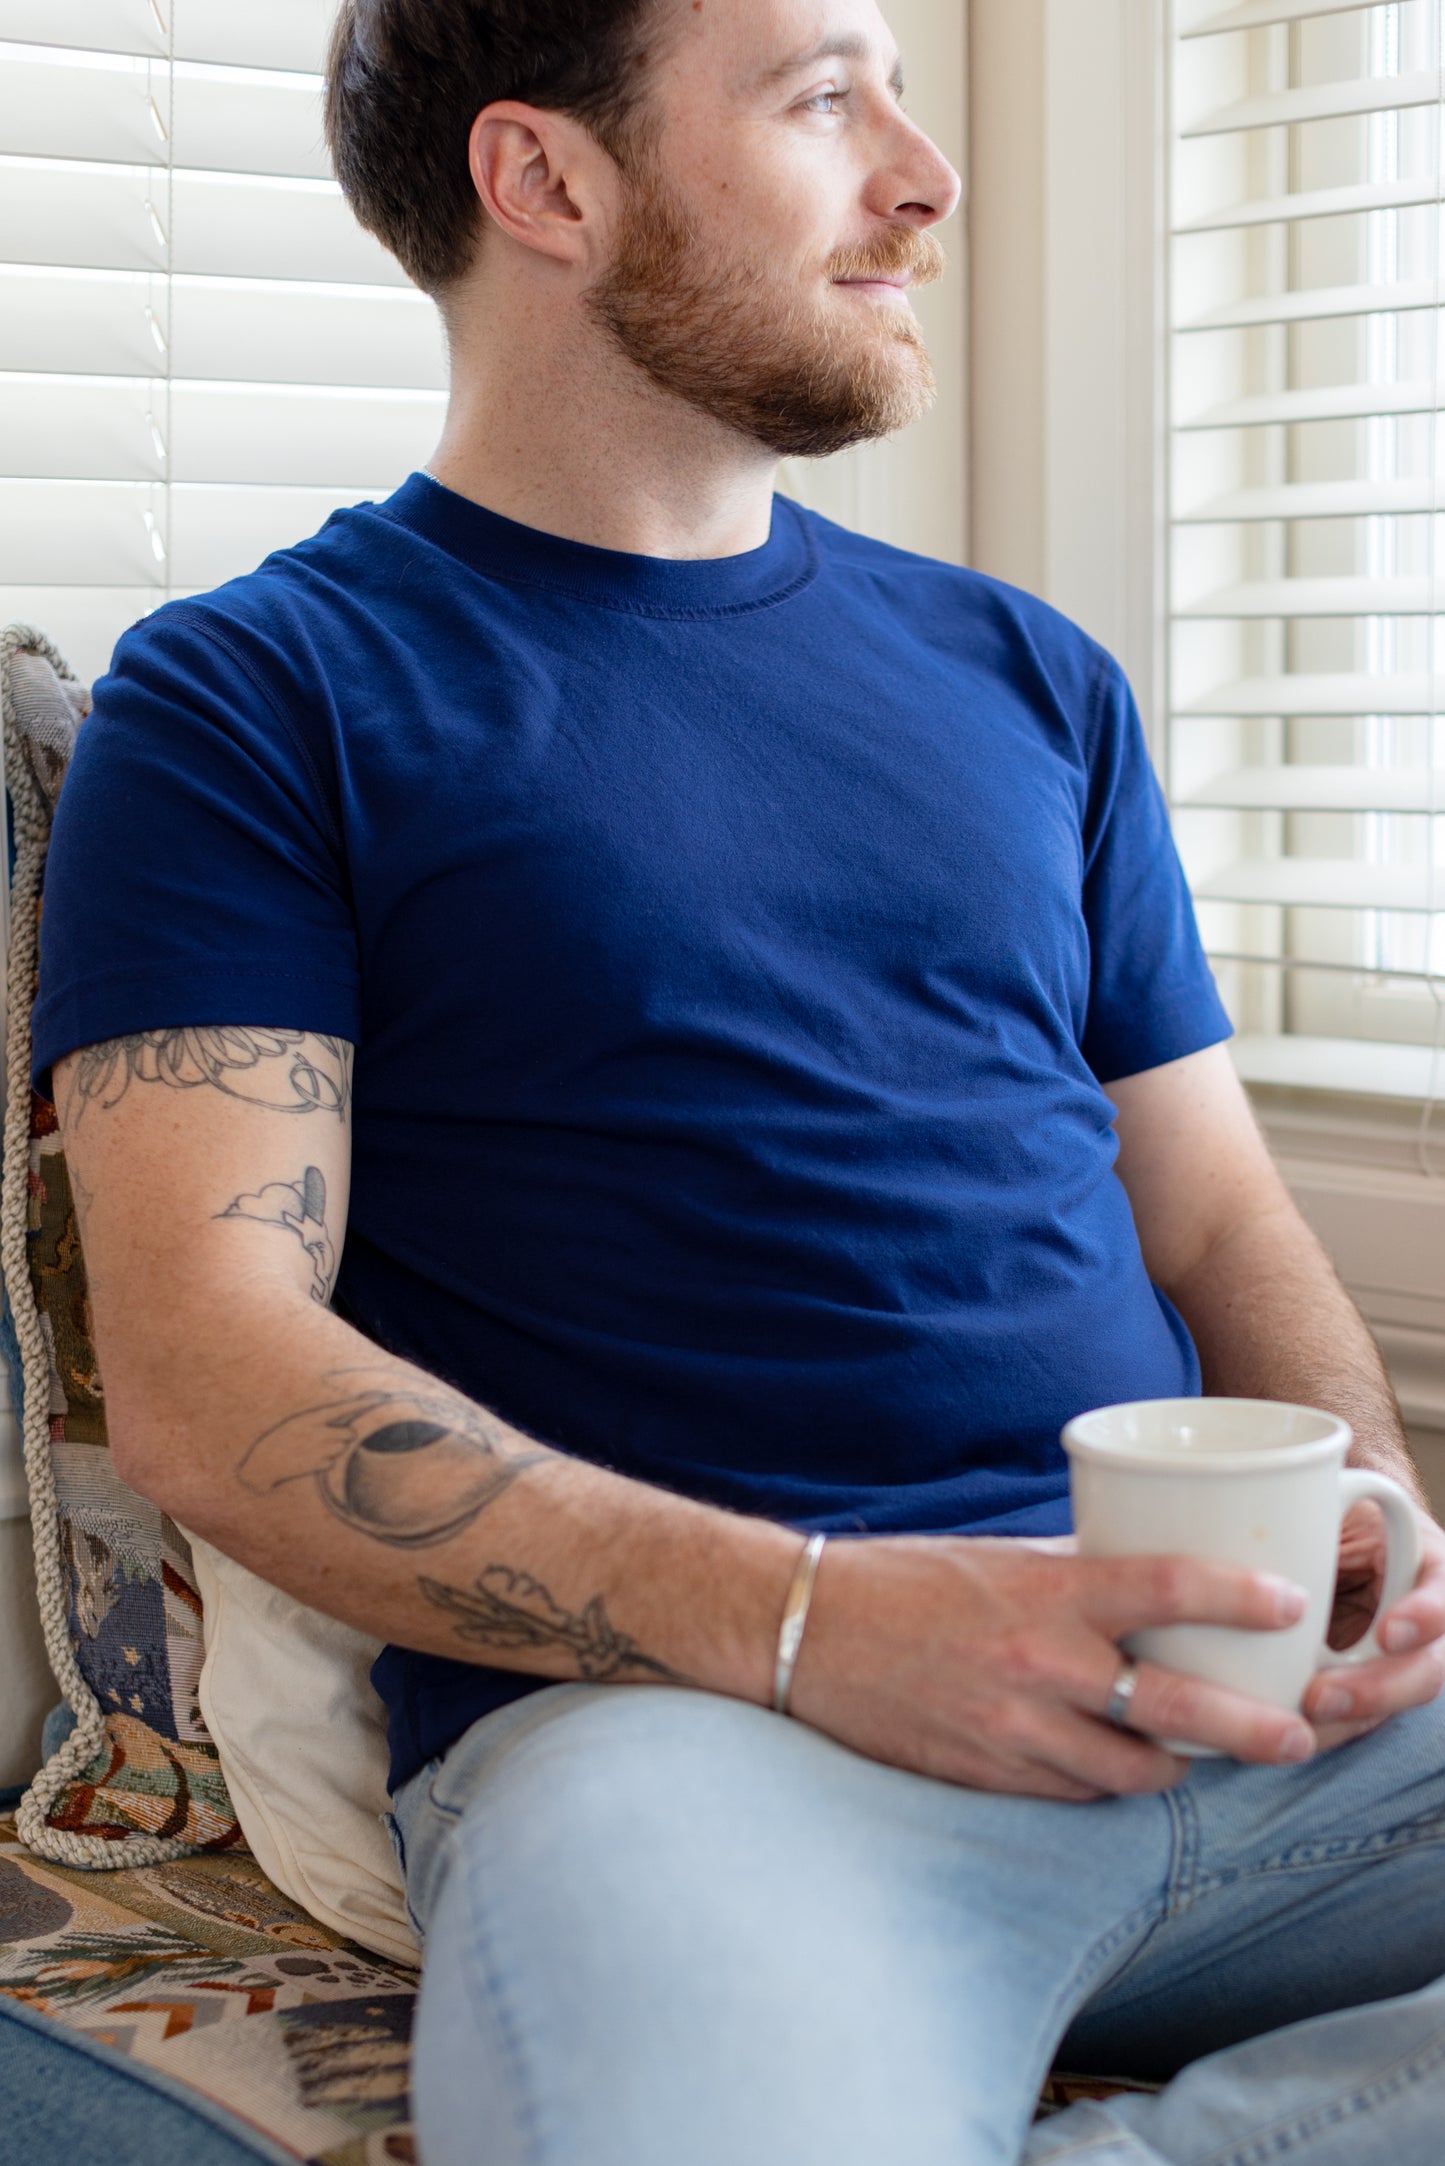 A white man with short brown hair wears a navy t-shirt. He sits on a window seat, holding a mug of coffee.